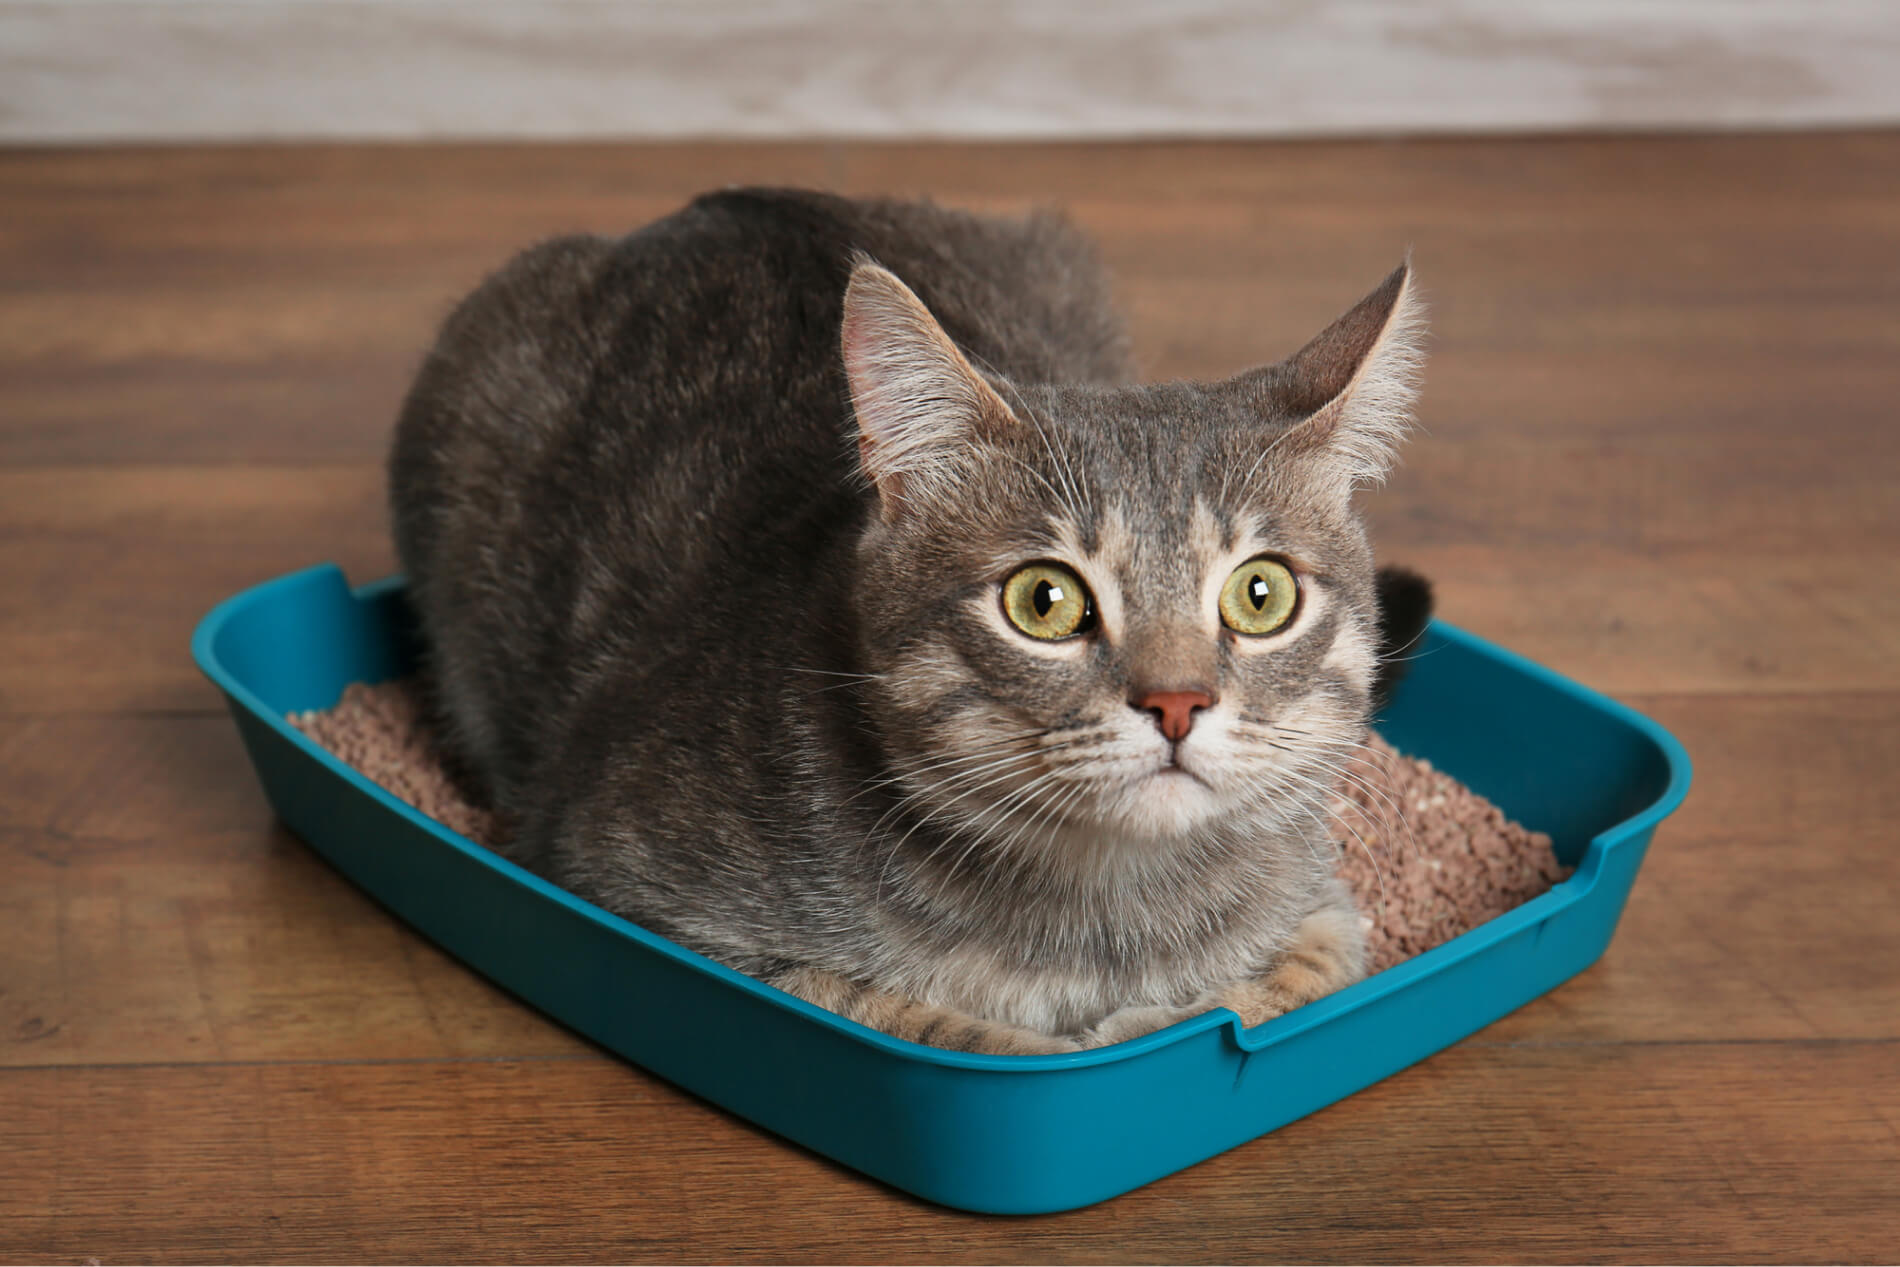 Cat eats cat litter: causes, risks and countermeasures